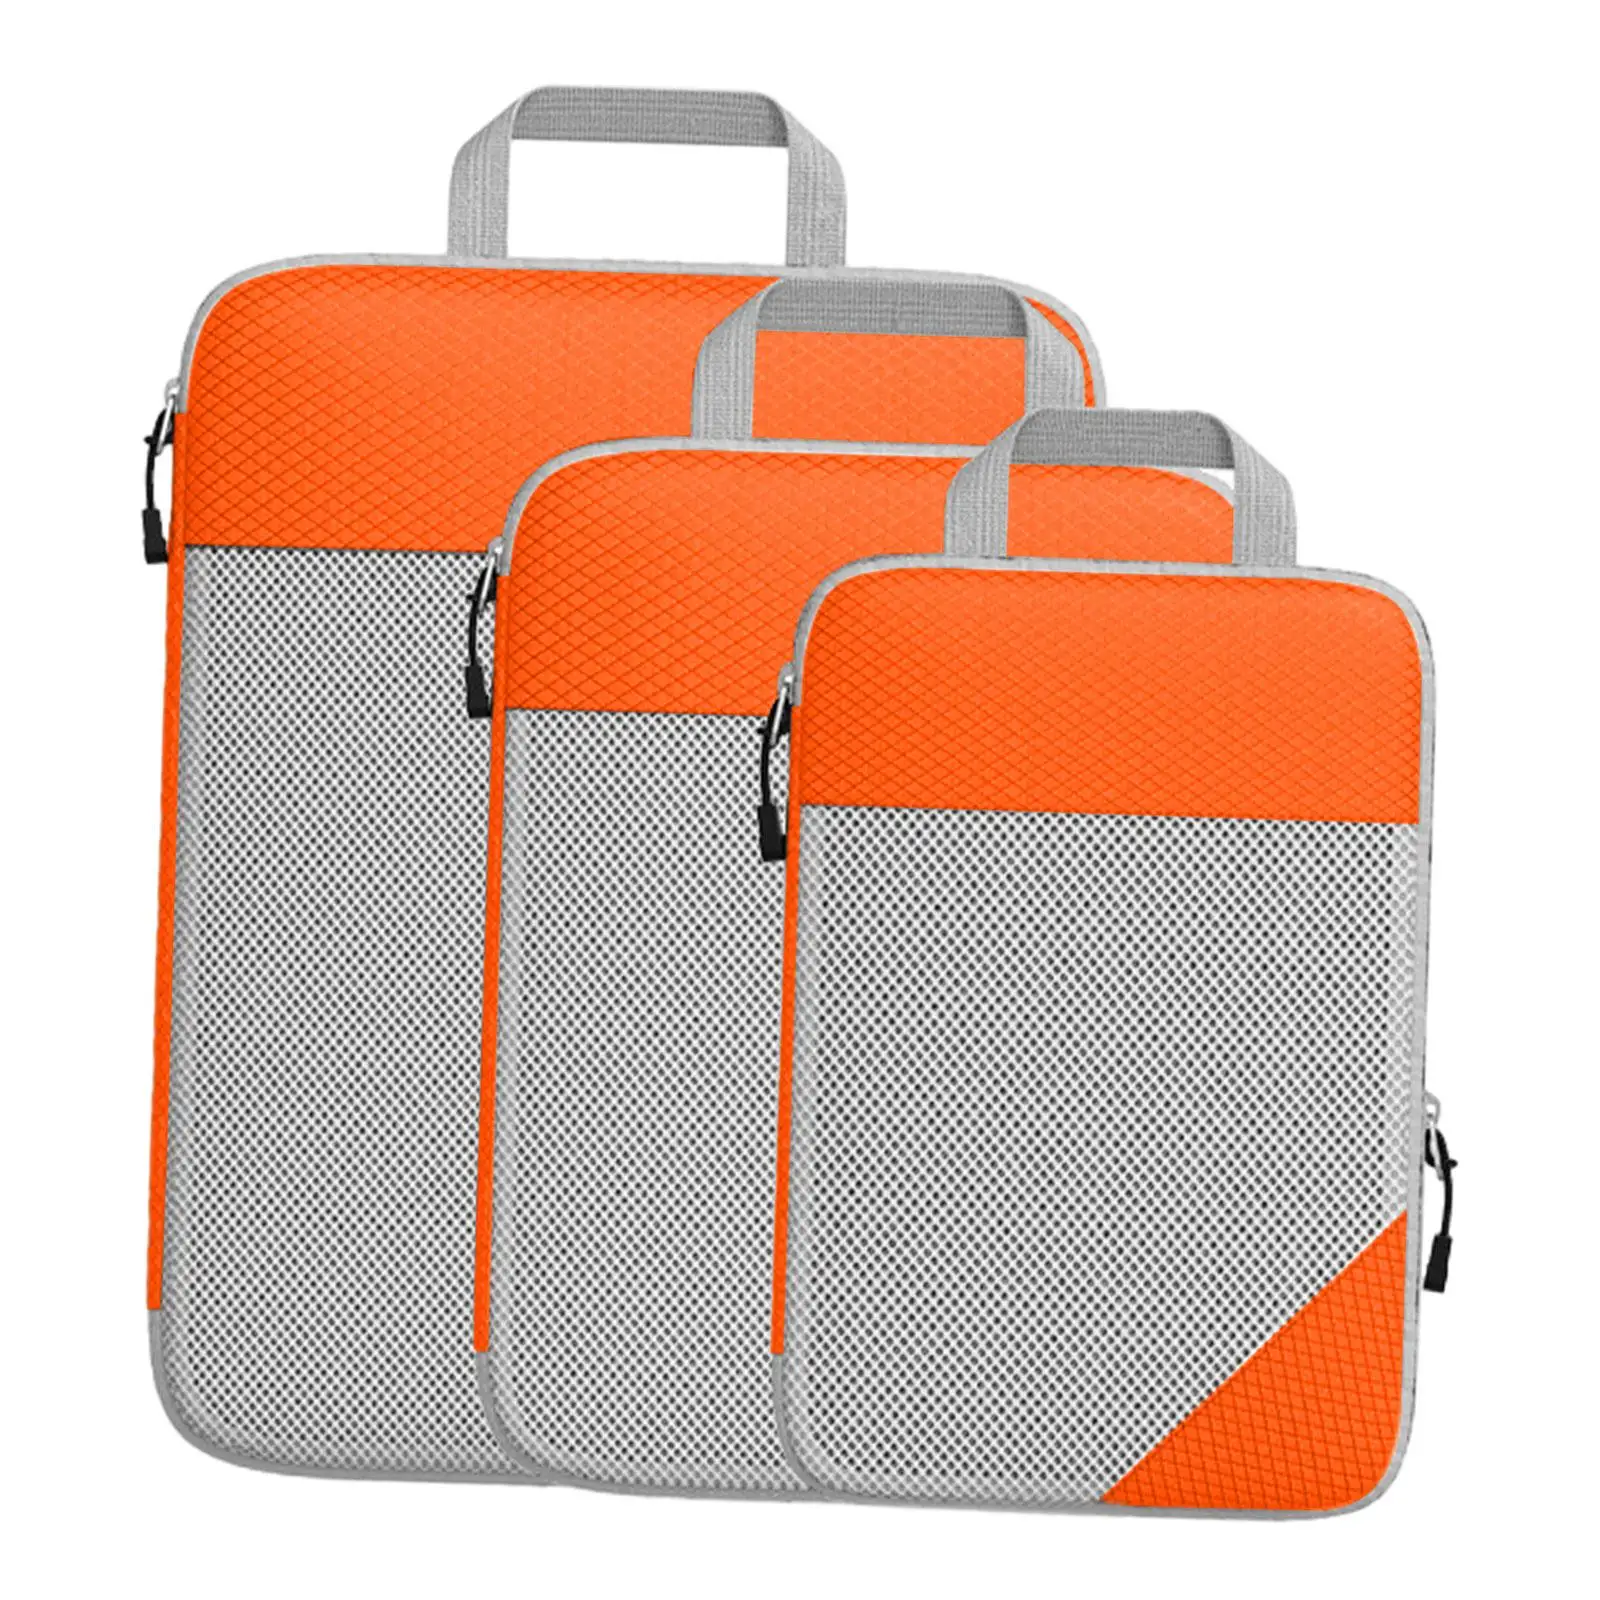 3Pcs Compression Packing Cubes Travel Organizer Cubes for Family Vacations